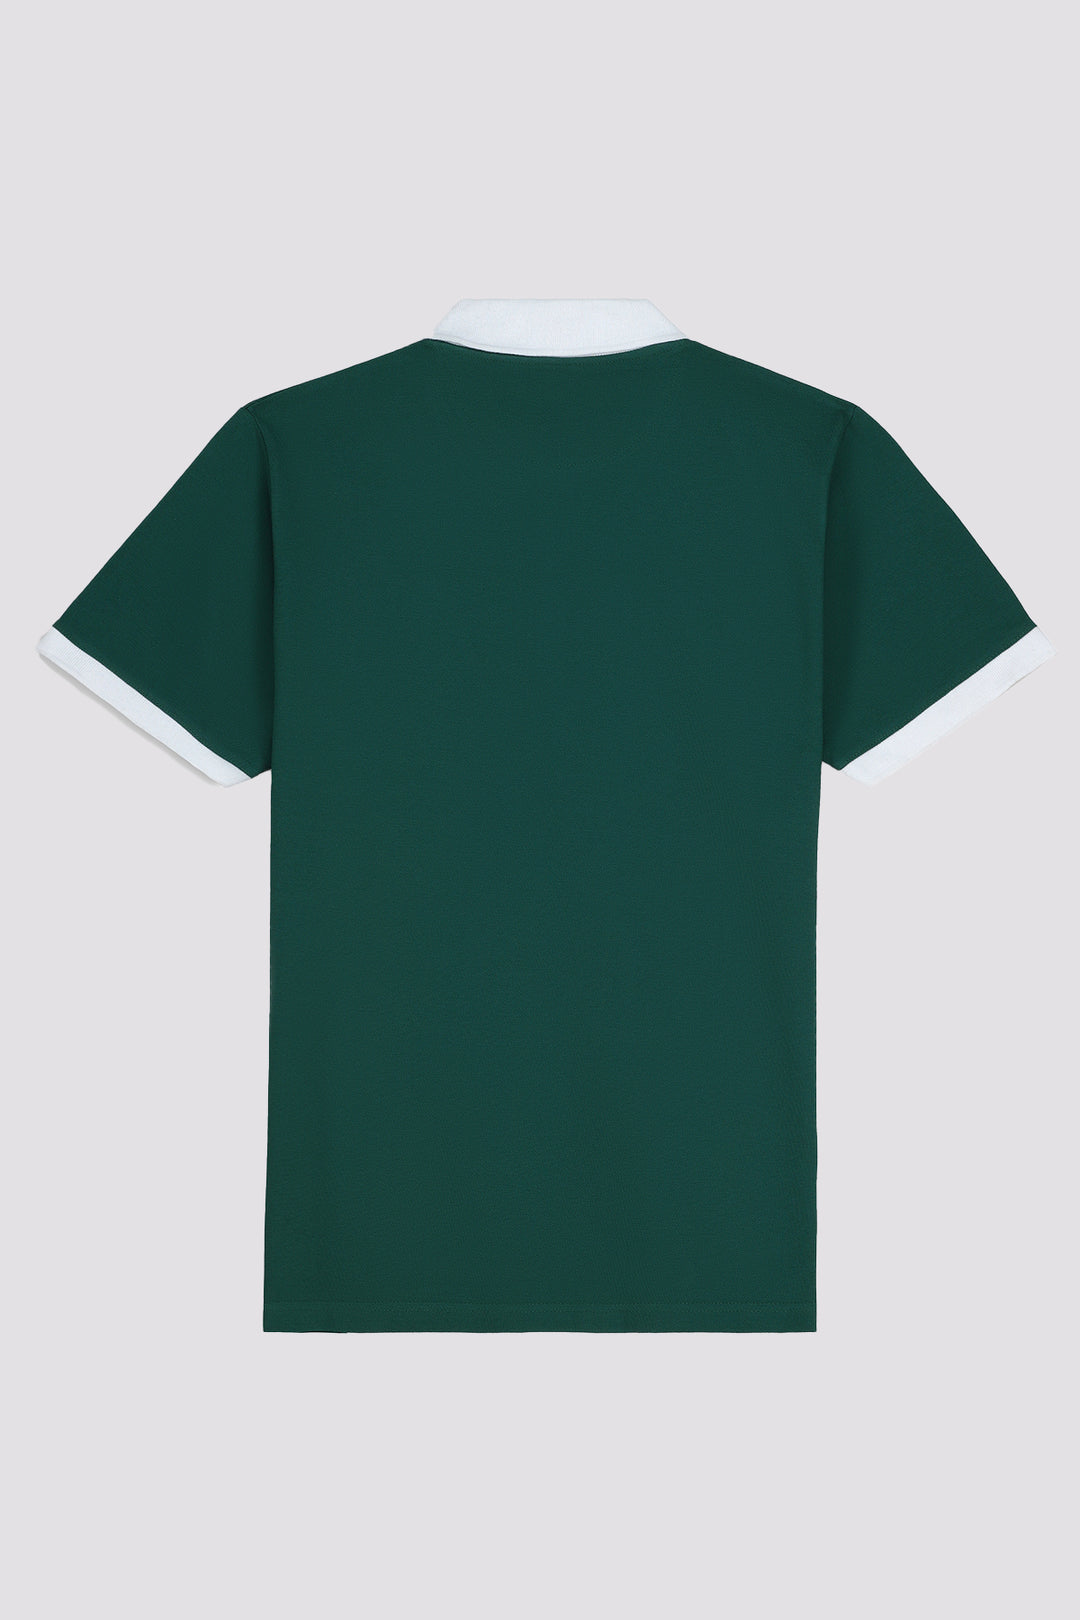 Pasture Green Contrast Collar Polo Shirt - S23 - MP0221R